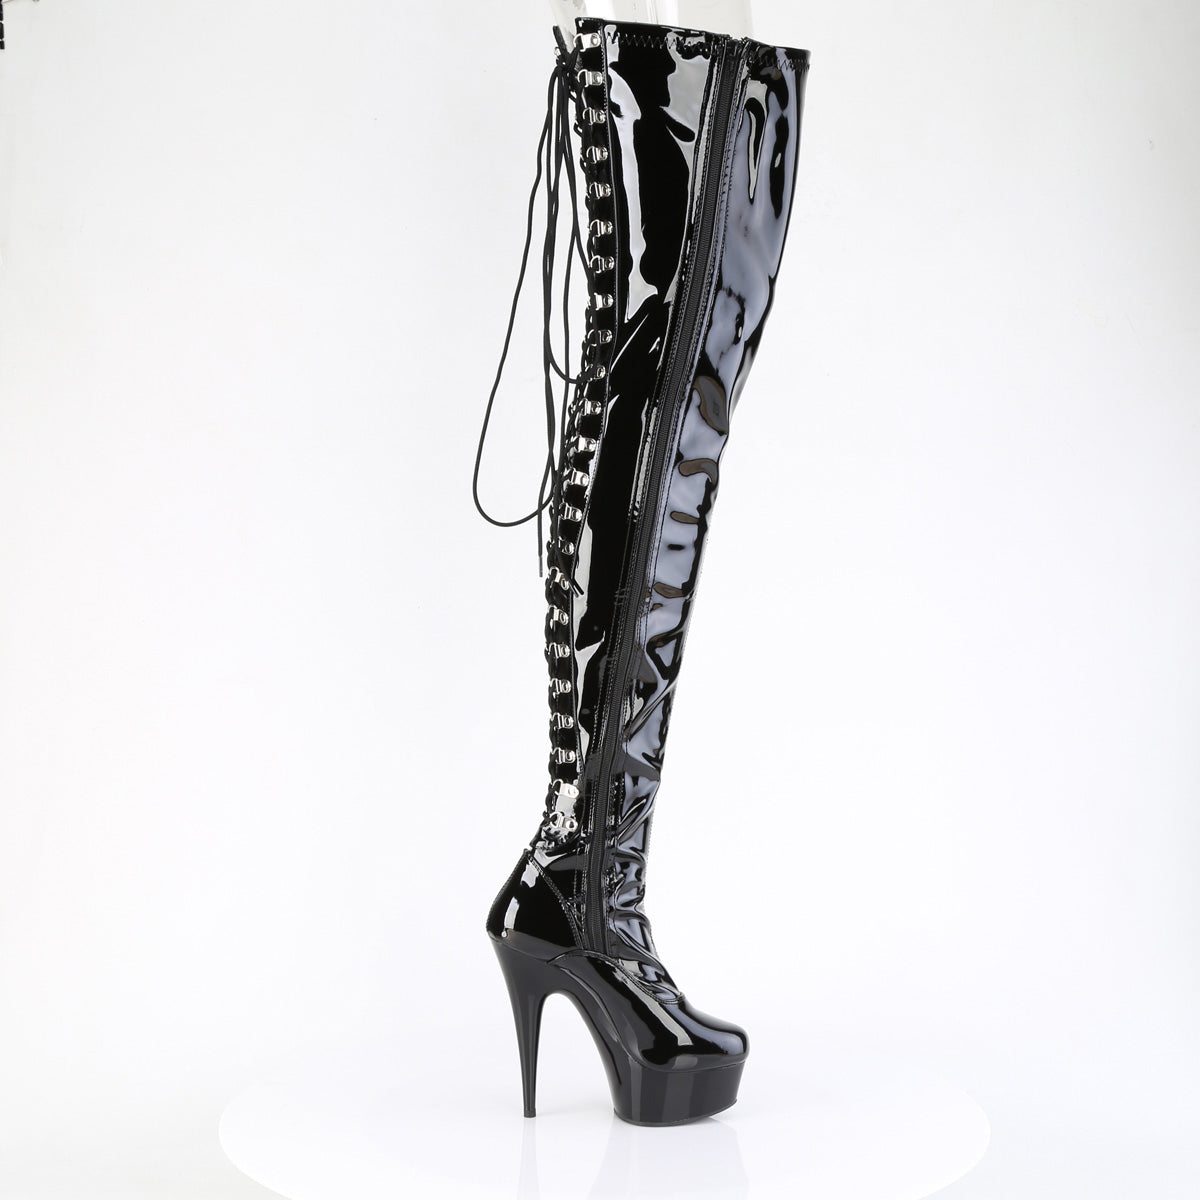 DELIGHT-4063 Back Lace Stretch Crotch Boot